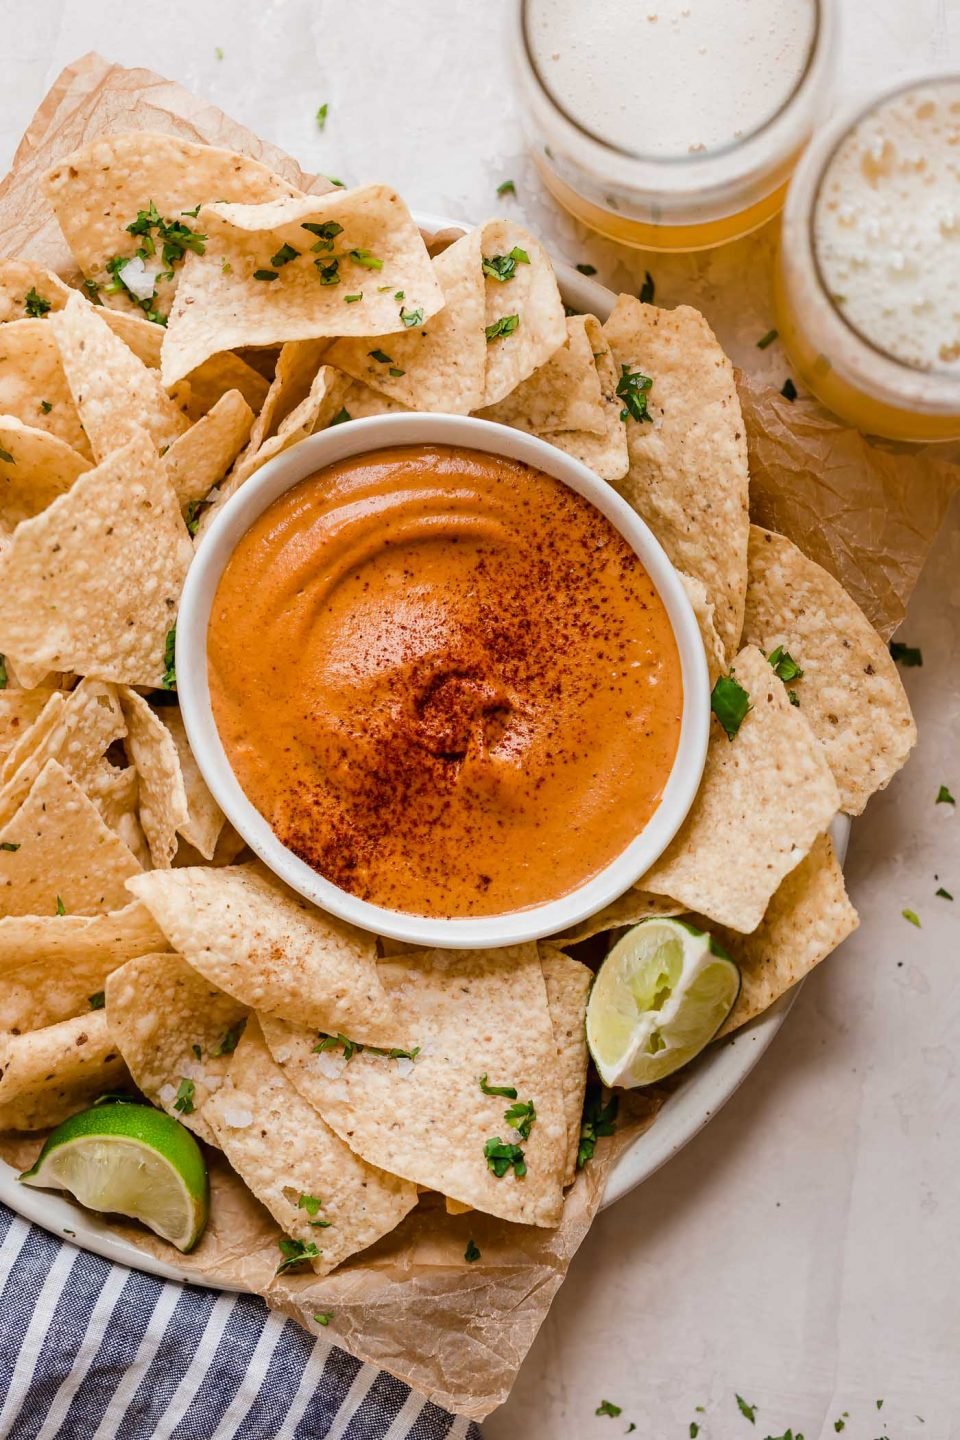 smoky chipotle cashew queso! an easy vegan queso recipe made with cashews, chipotle peppers, spices, & lime juice! the perfect healthy game day snack, smoky chipotle cashew queso will be the hit of your next game day party! #playswellwithbutter #cashewqueso #veganqueso #easyveganrecipes #vegansnack #gamedaysnacks #gamedayappetizer #gamedayfood #healthysnack